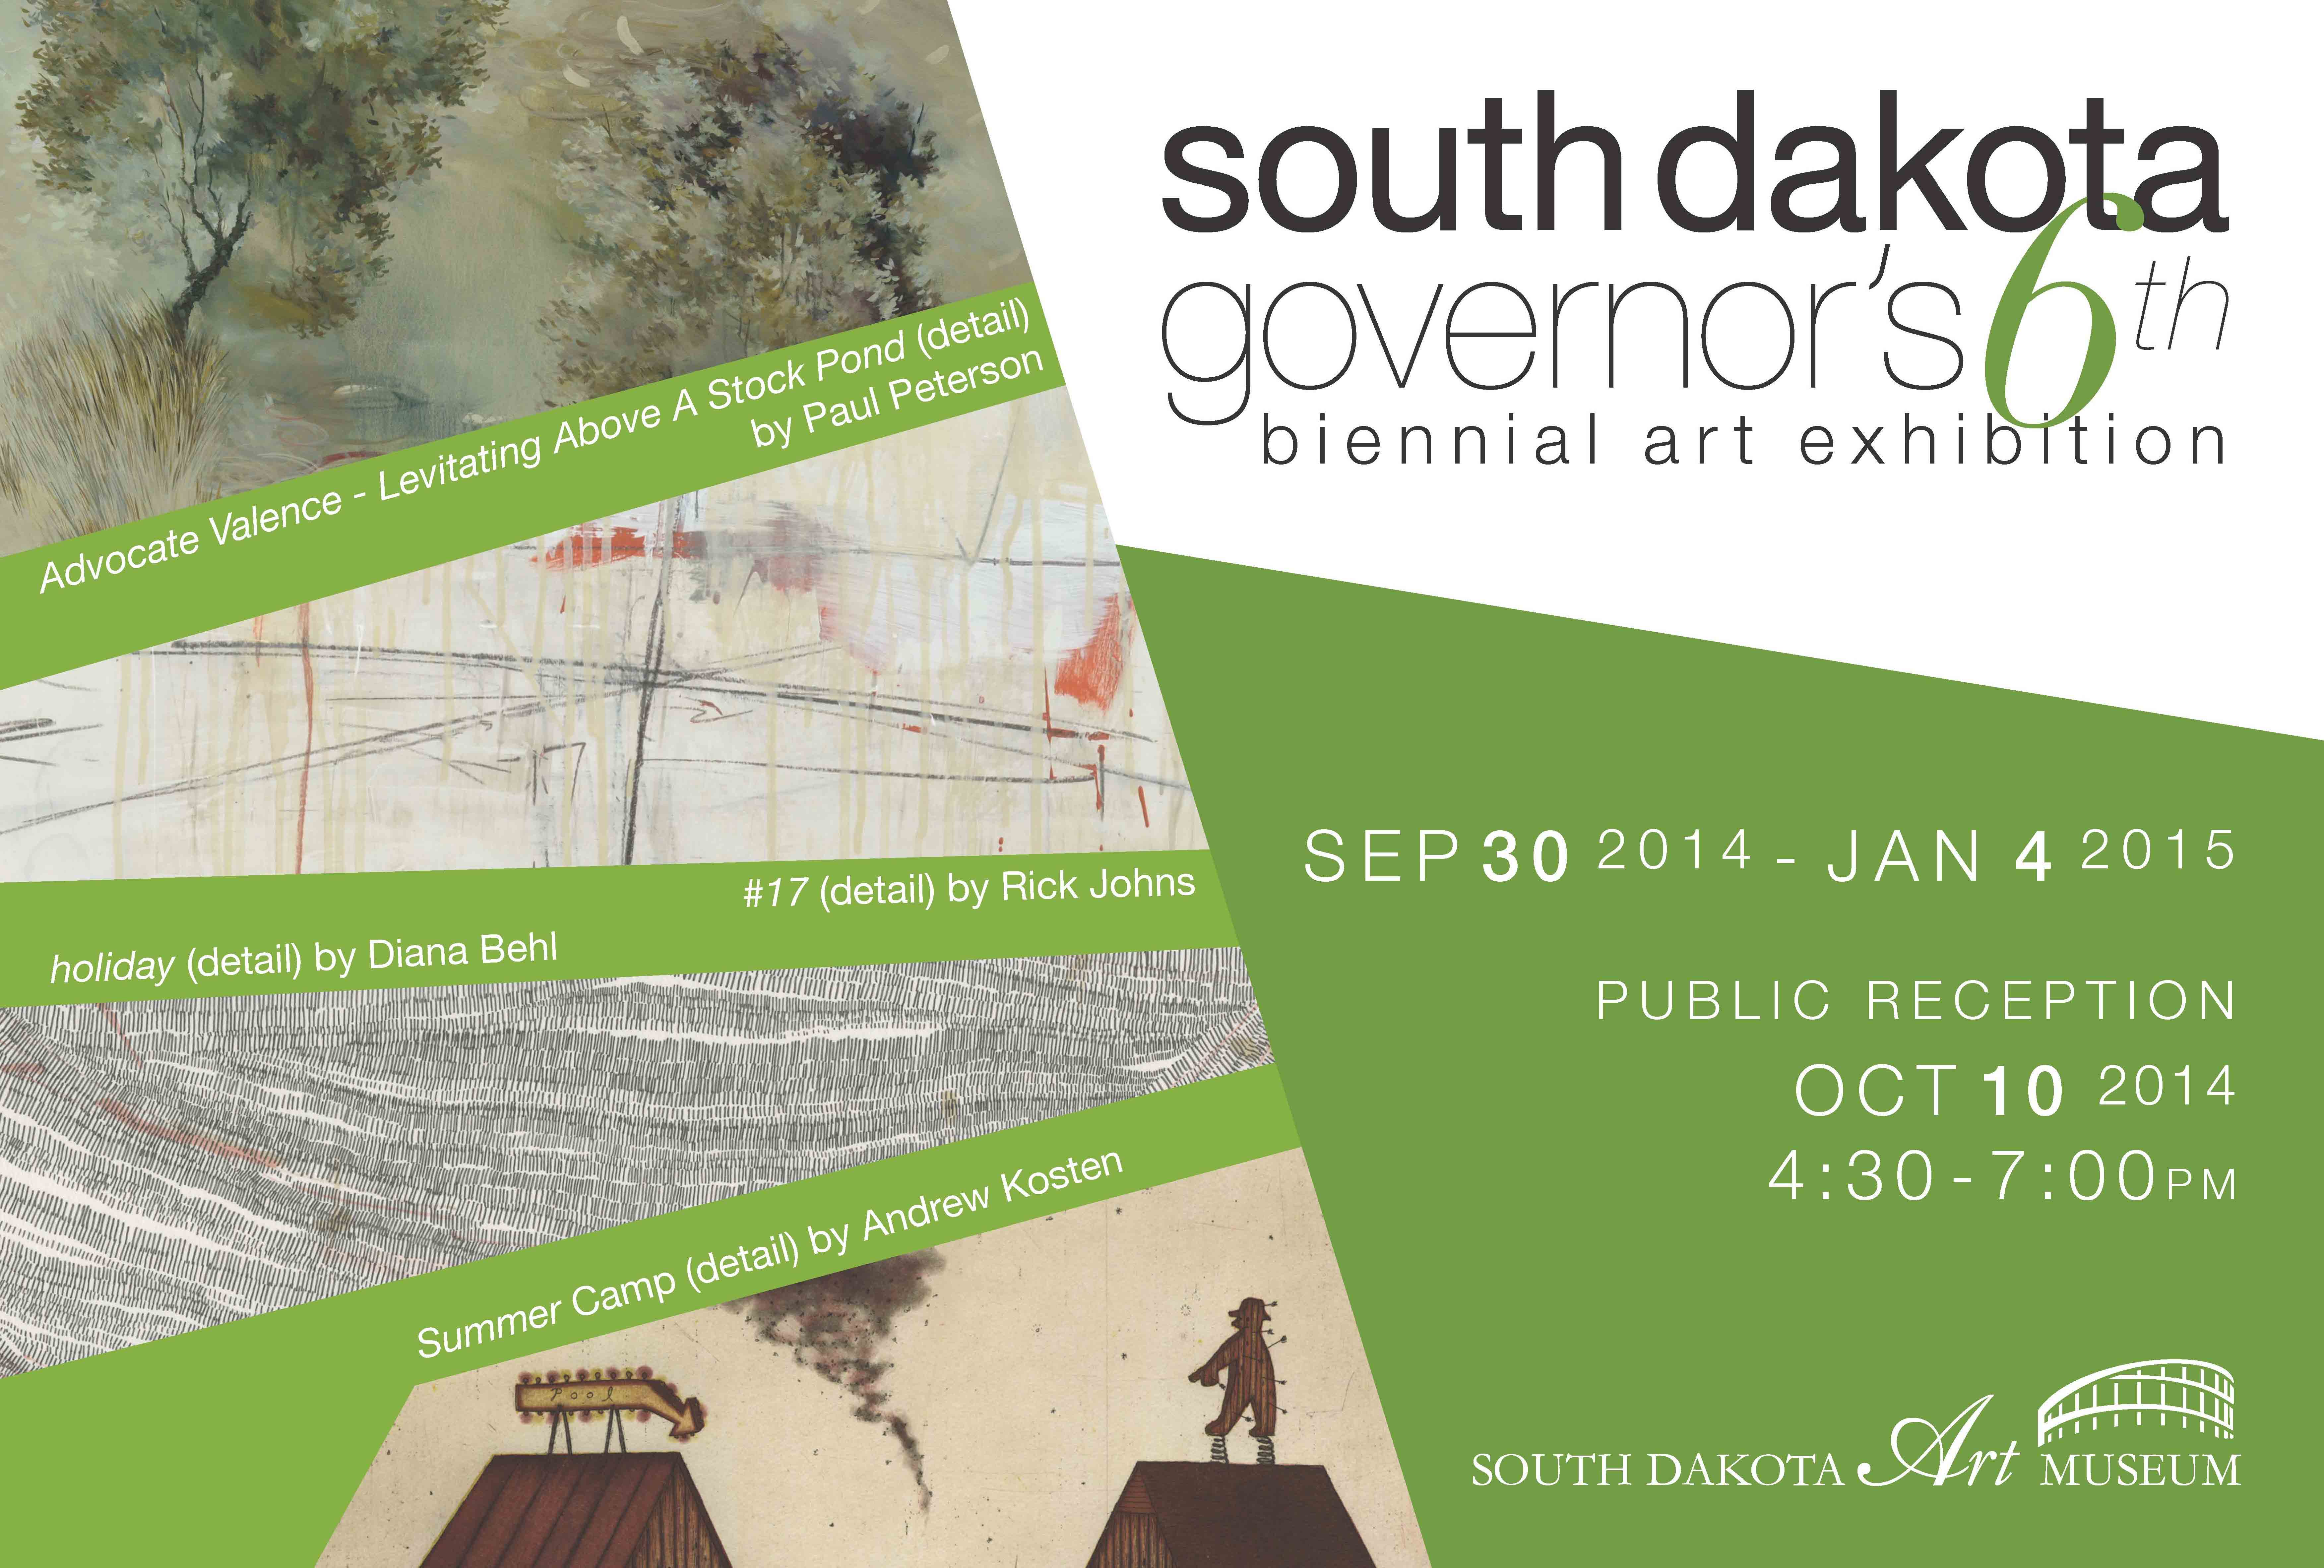 South Dakota governor's 6th biennial art exhibition poster featuring artwork by Paul Peterson, Rick Johns and Andrew Kosten